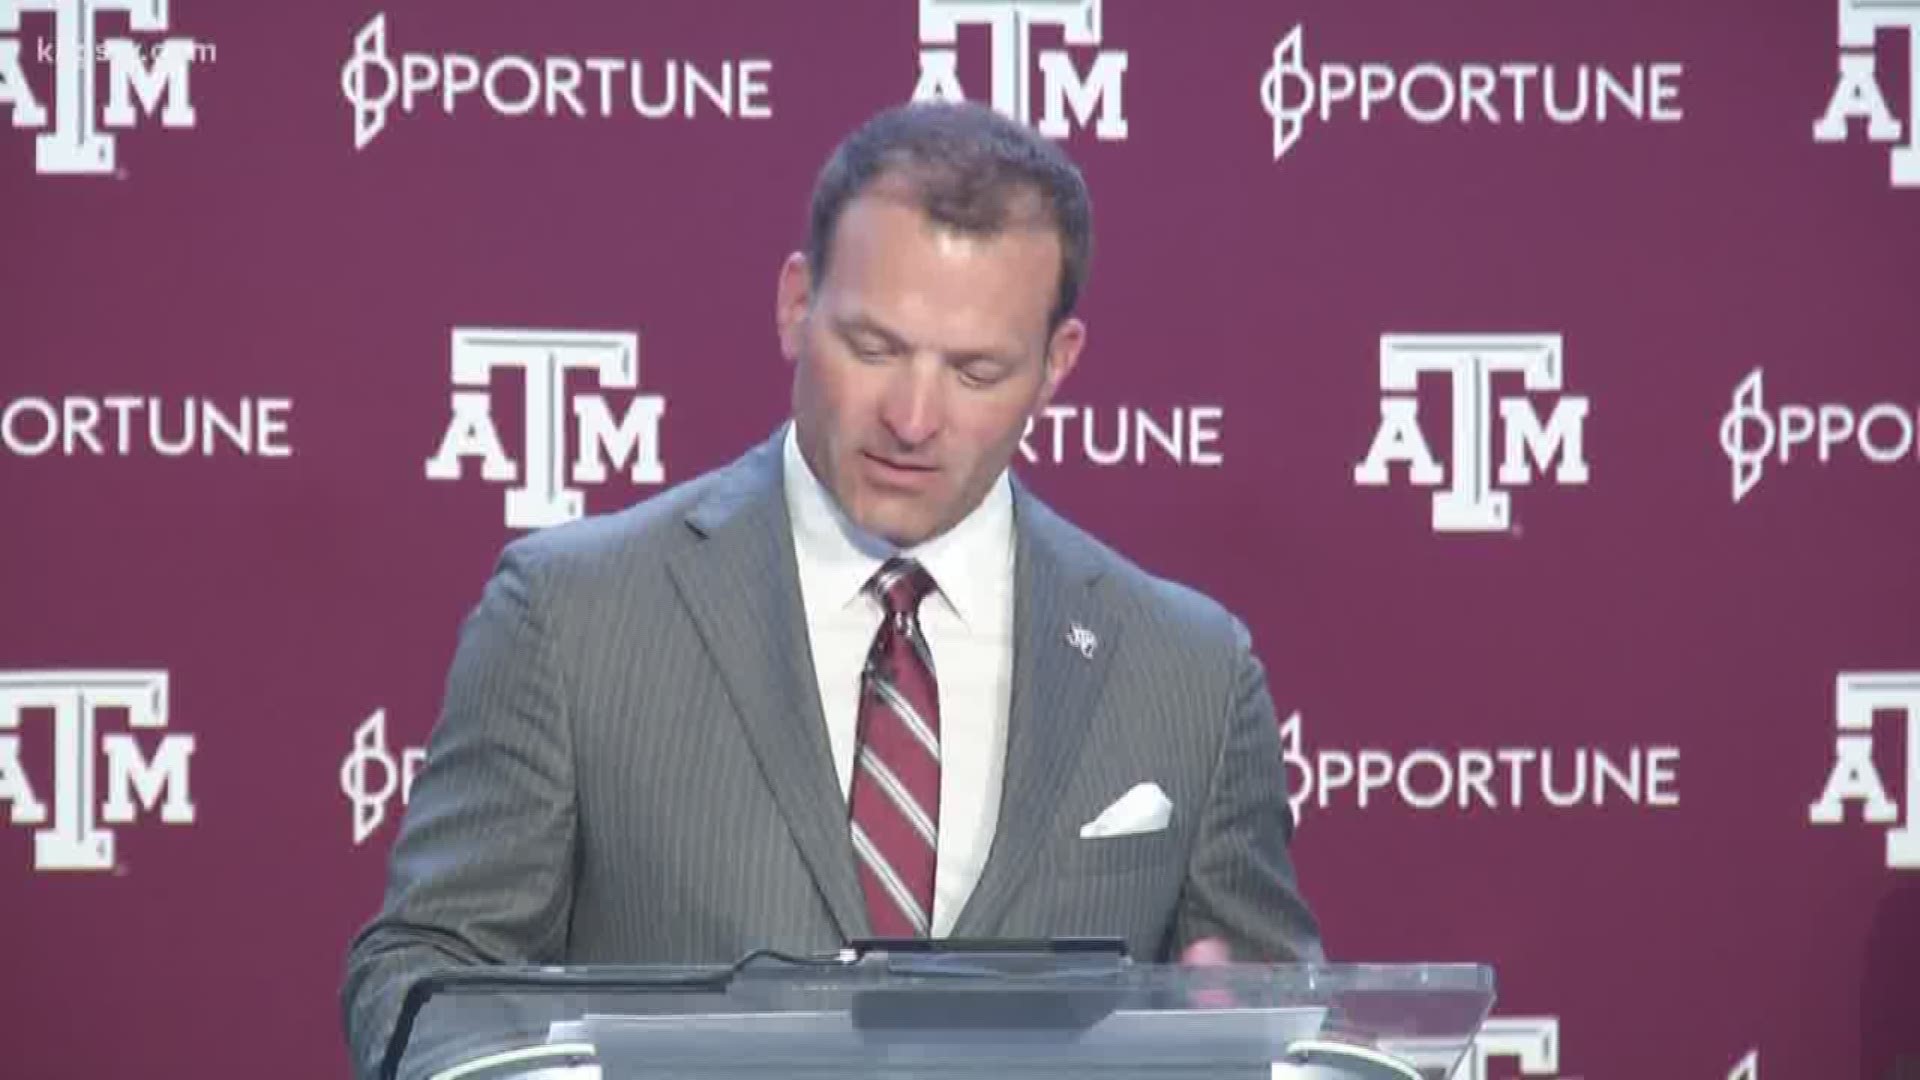 Coming to Aggieland from Ole Miss, Ross Bjork was officially introduced as Texas A&M's new athletic director on Monday afternoon at Kyle Field's Hall of Champions.